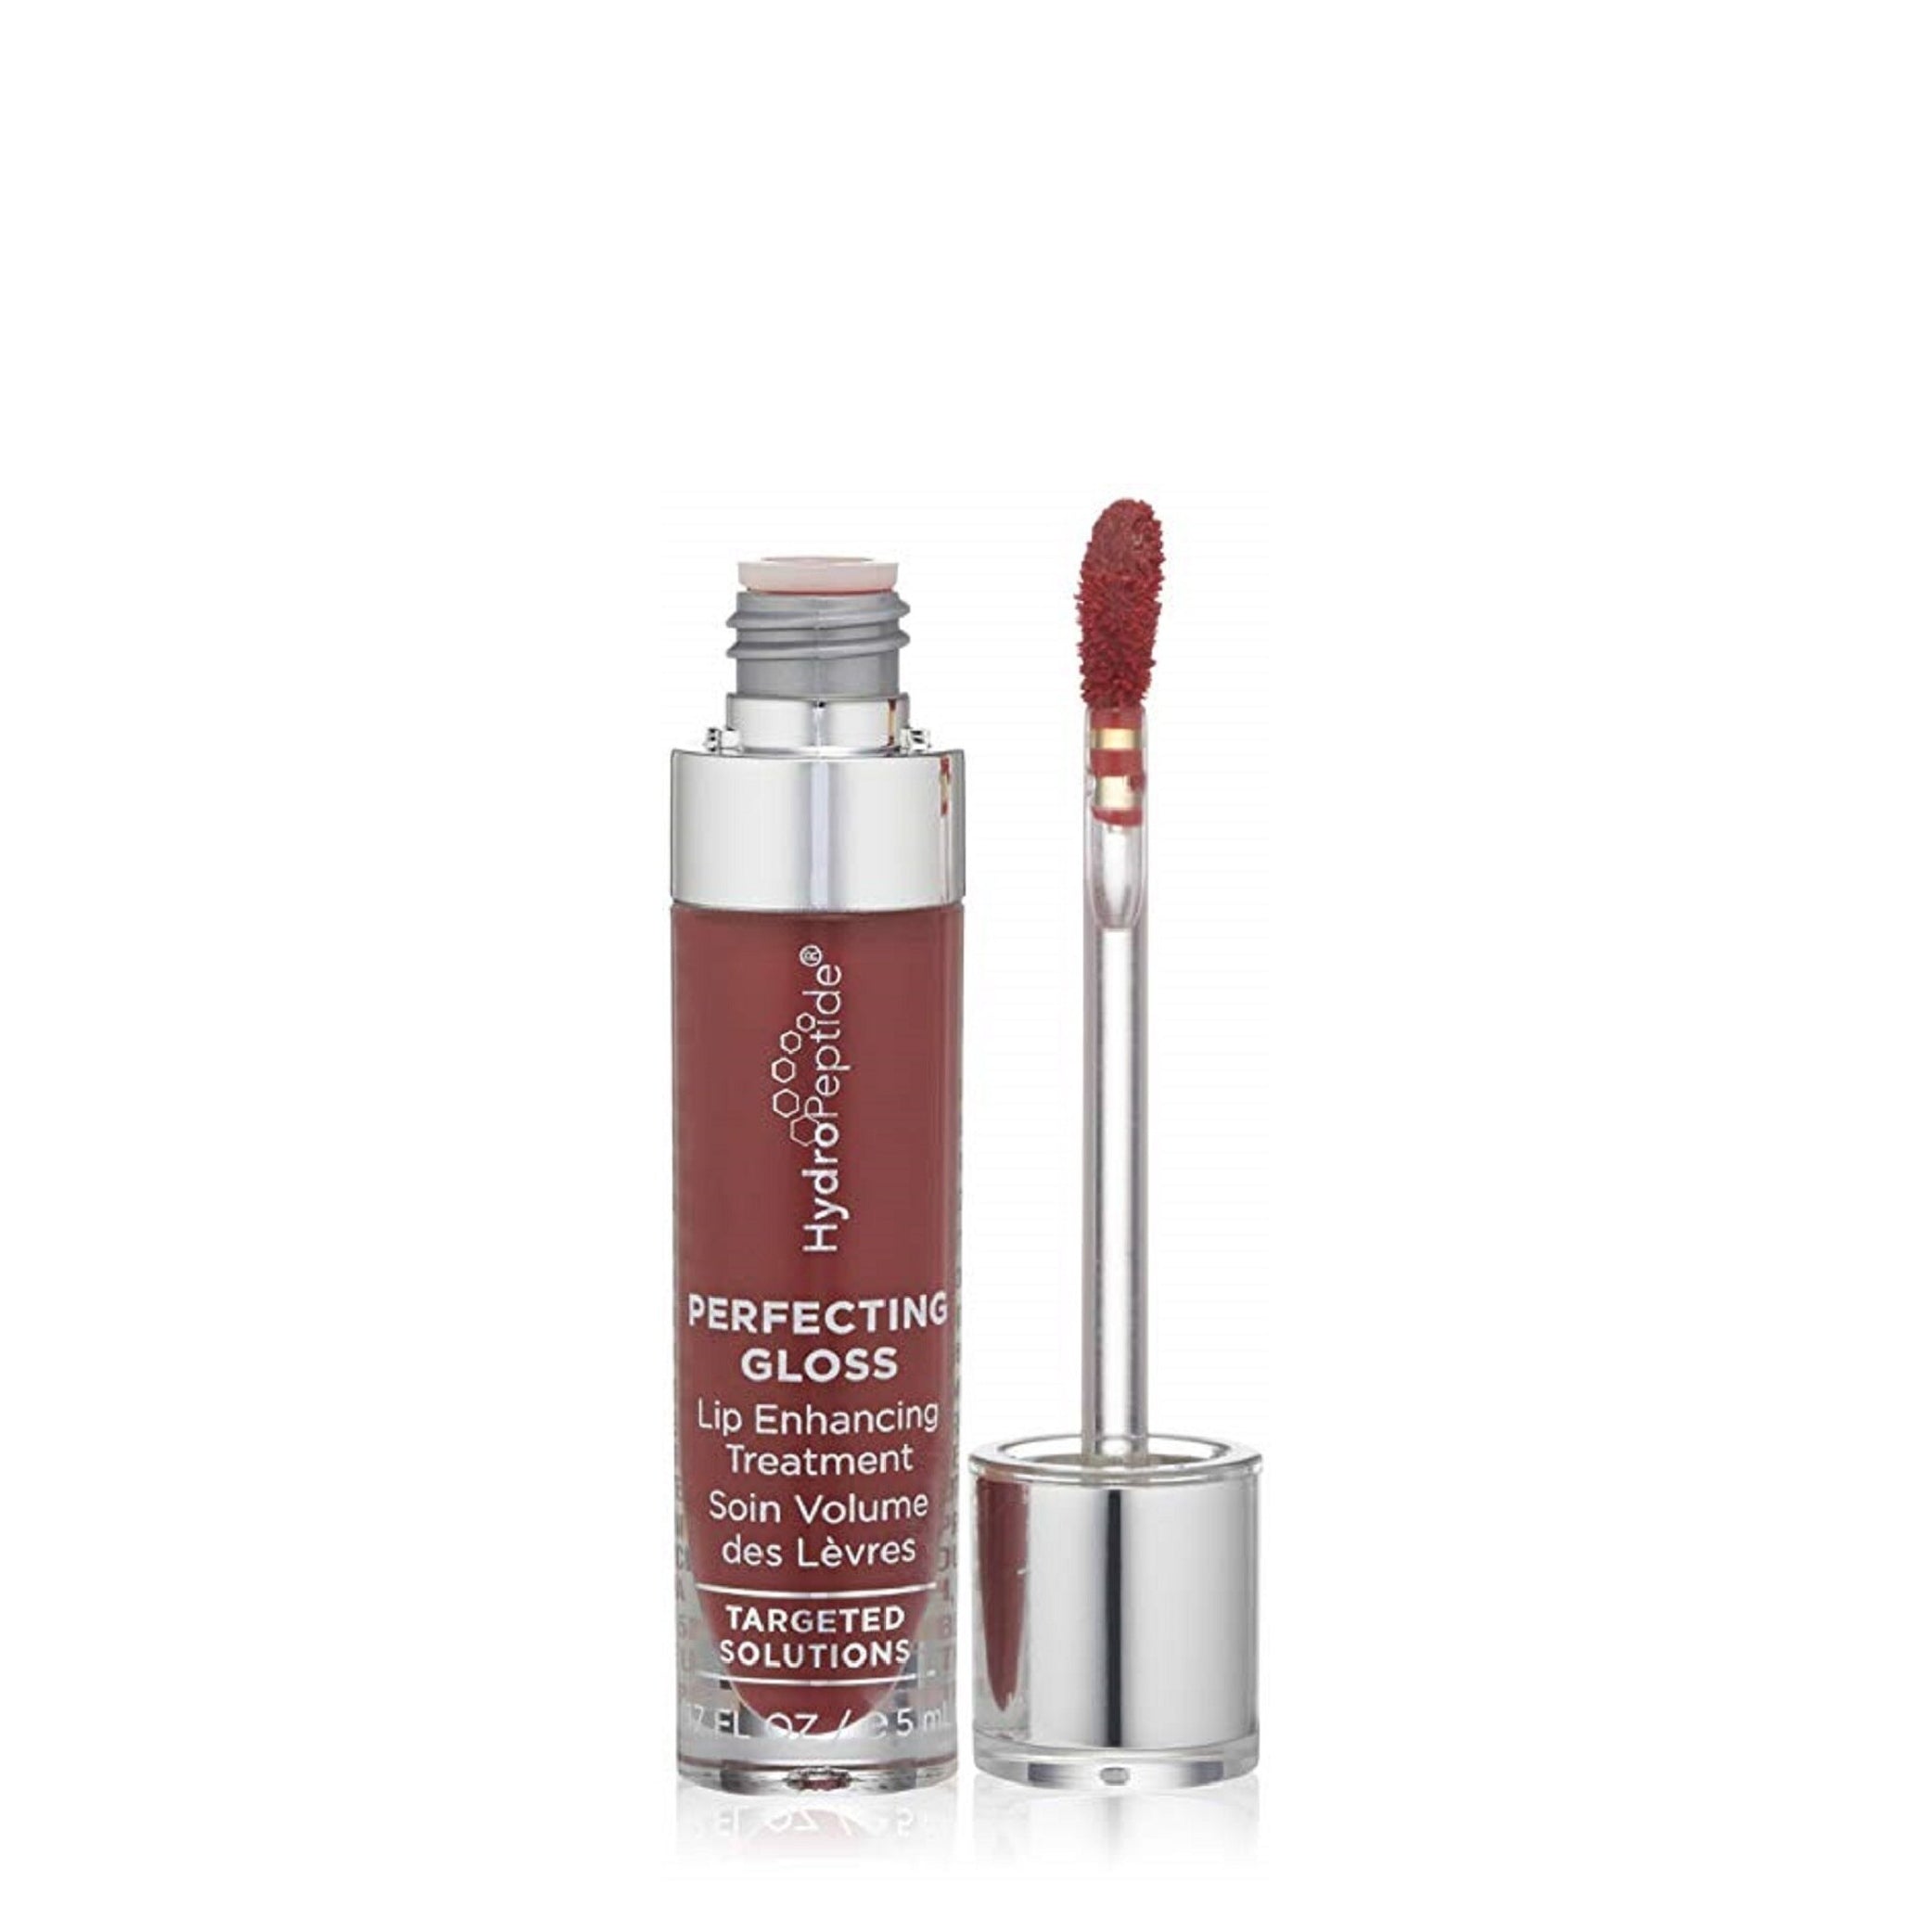 Perfecting Gloss - Soin volume des lèvres